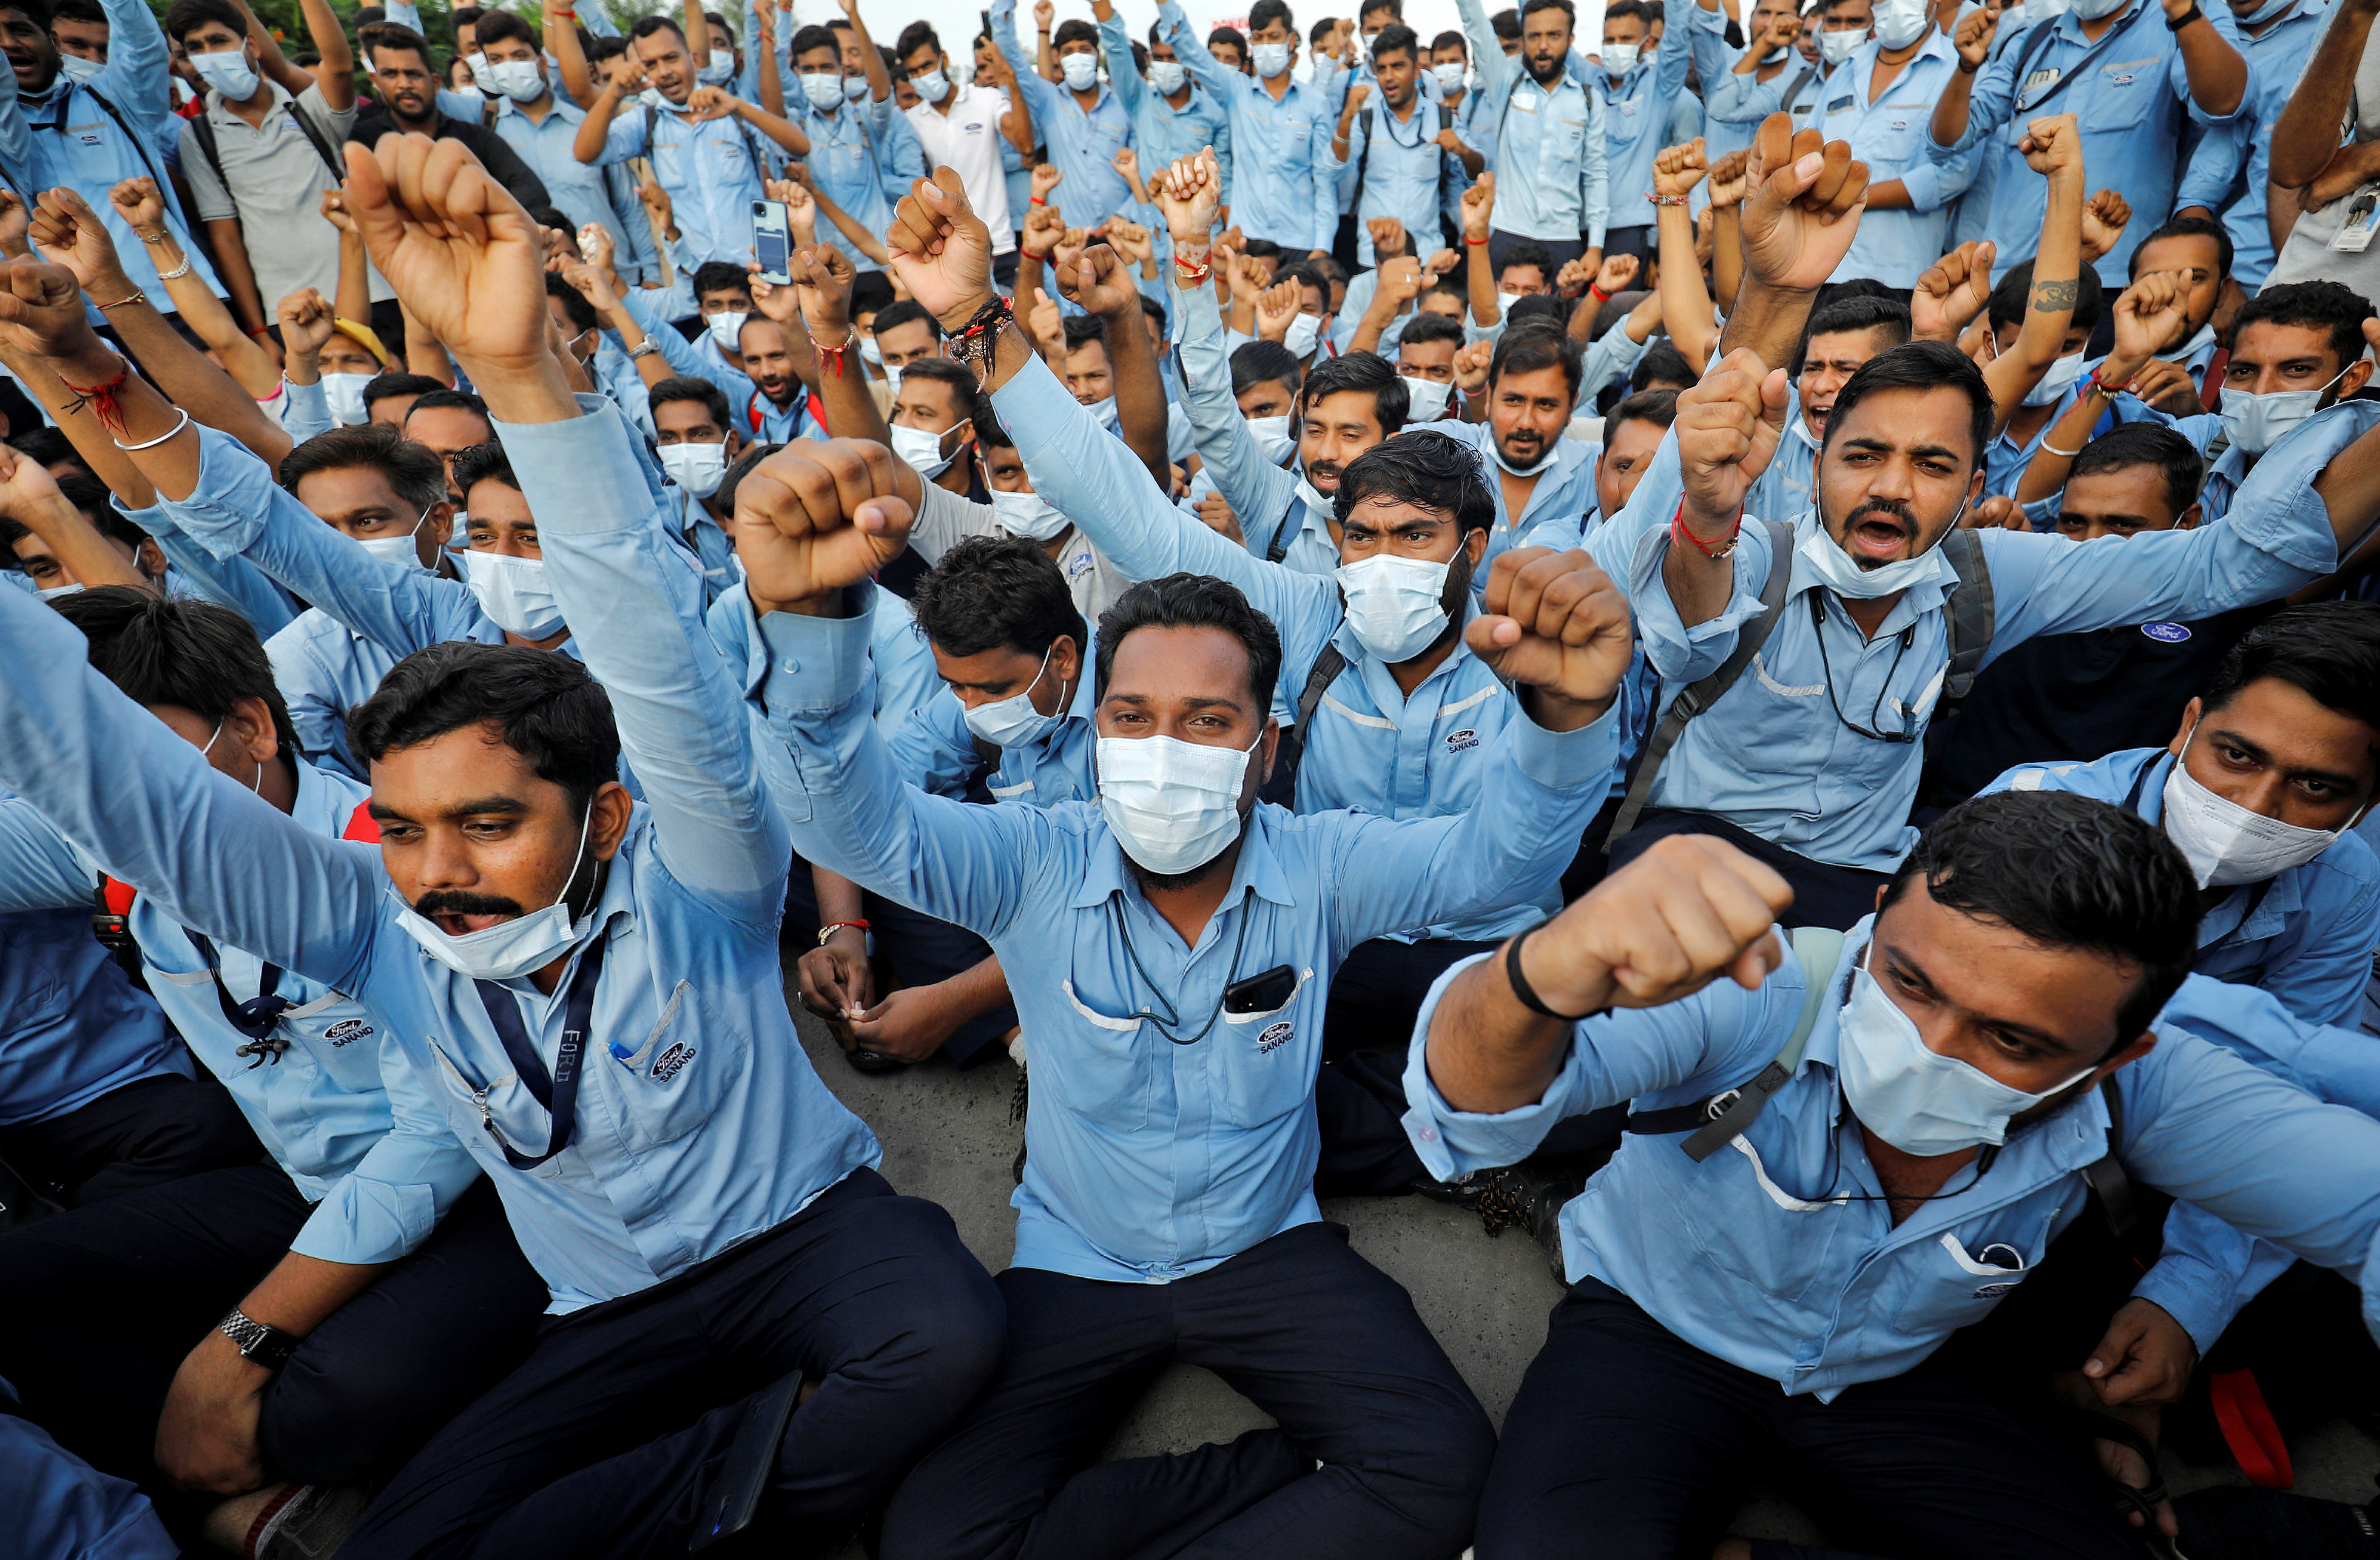 Workers of Ford Motor Co. shout slogans during a protest outside Ford's car assembly and engine-making facility in Sanand, Gujarat, India, September 21, 2021. REUTERS/Amit Dave